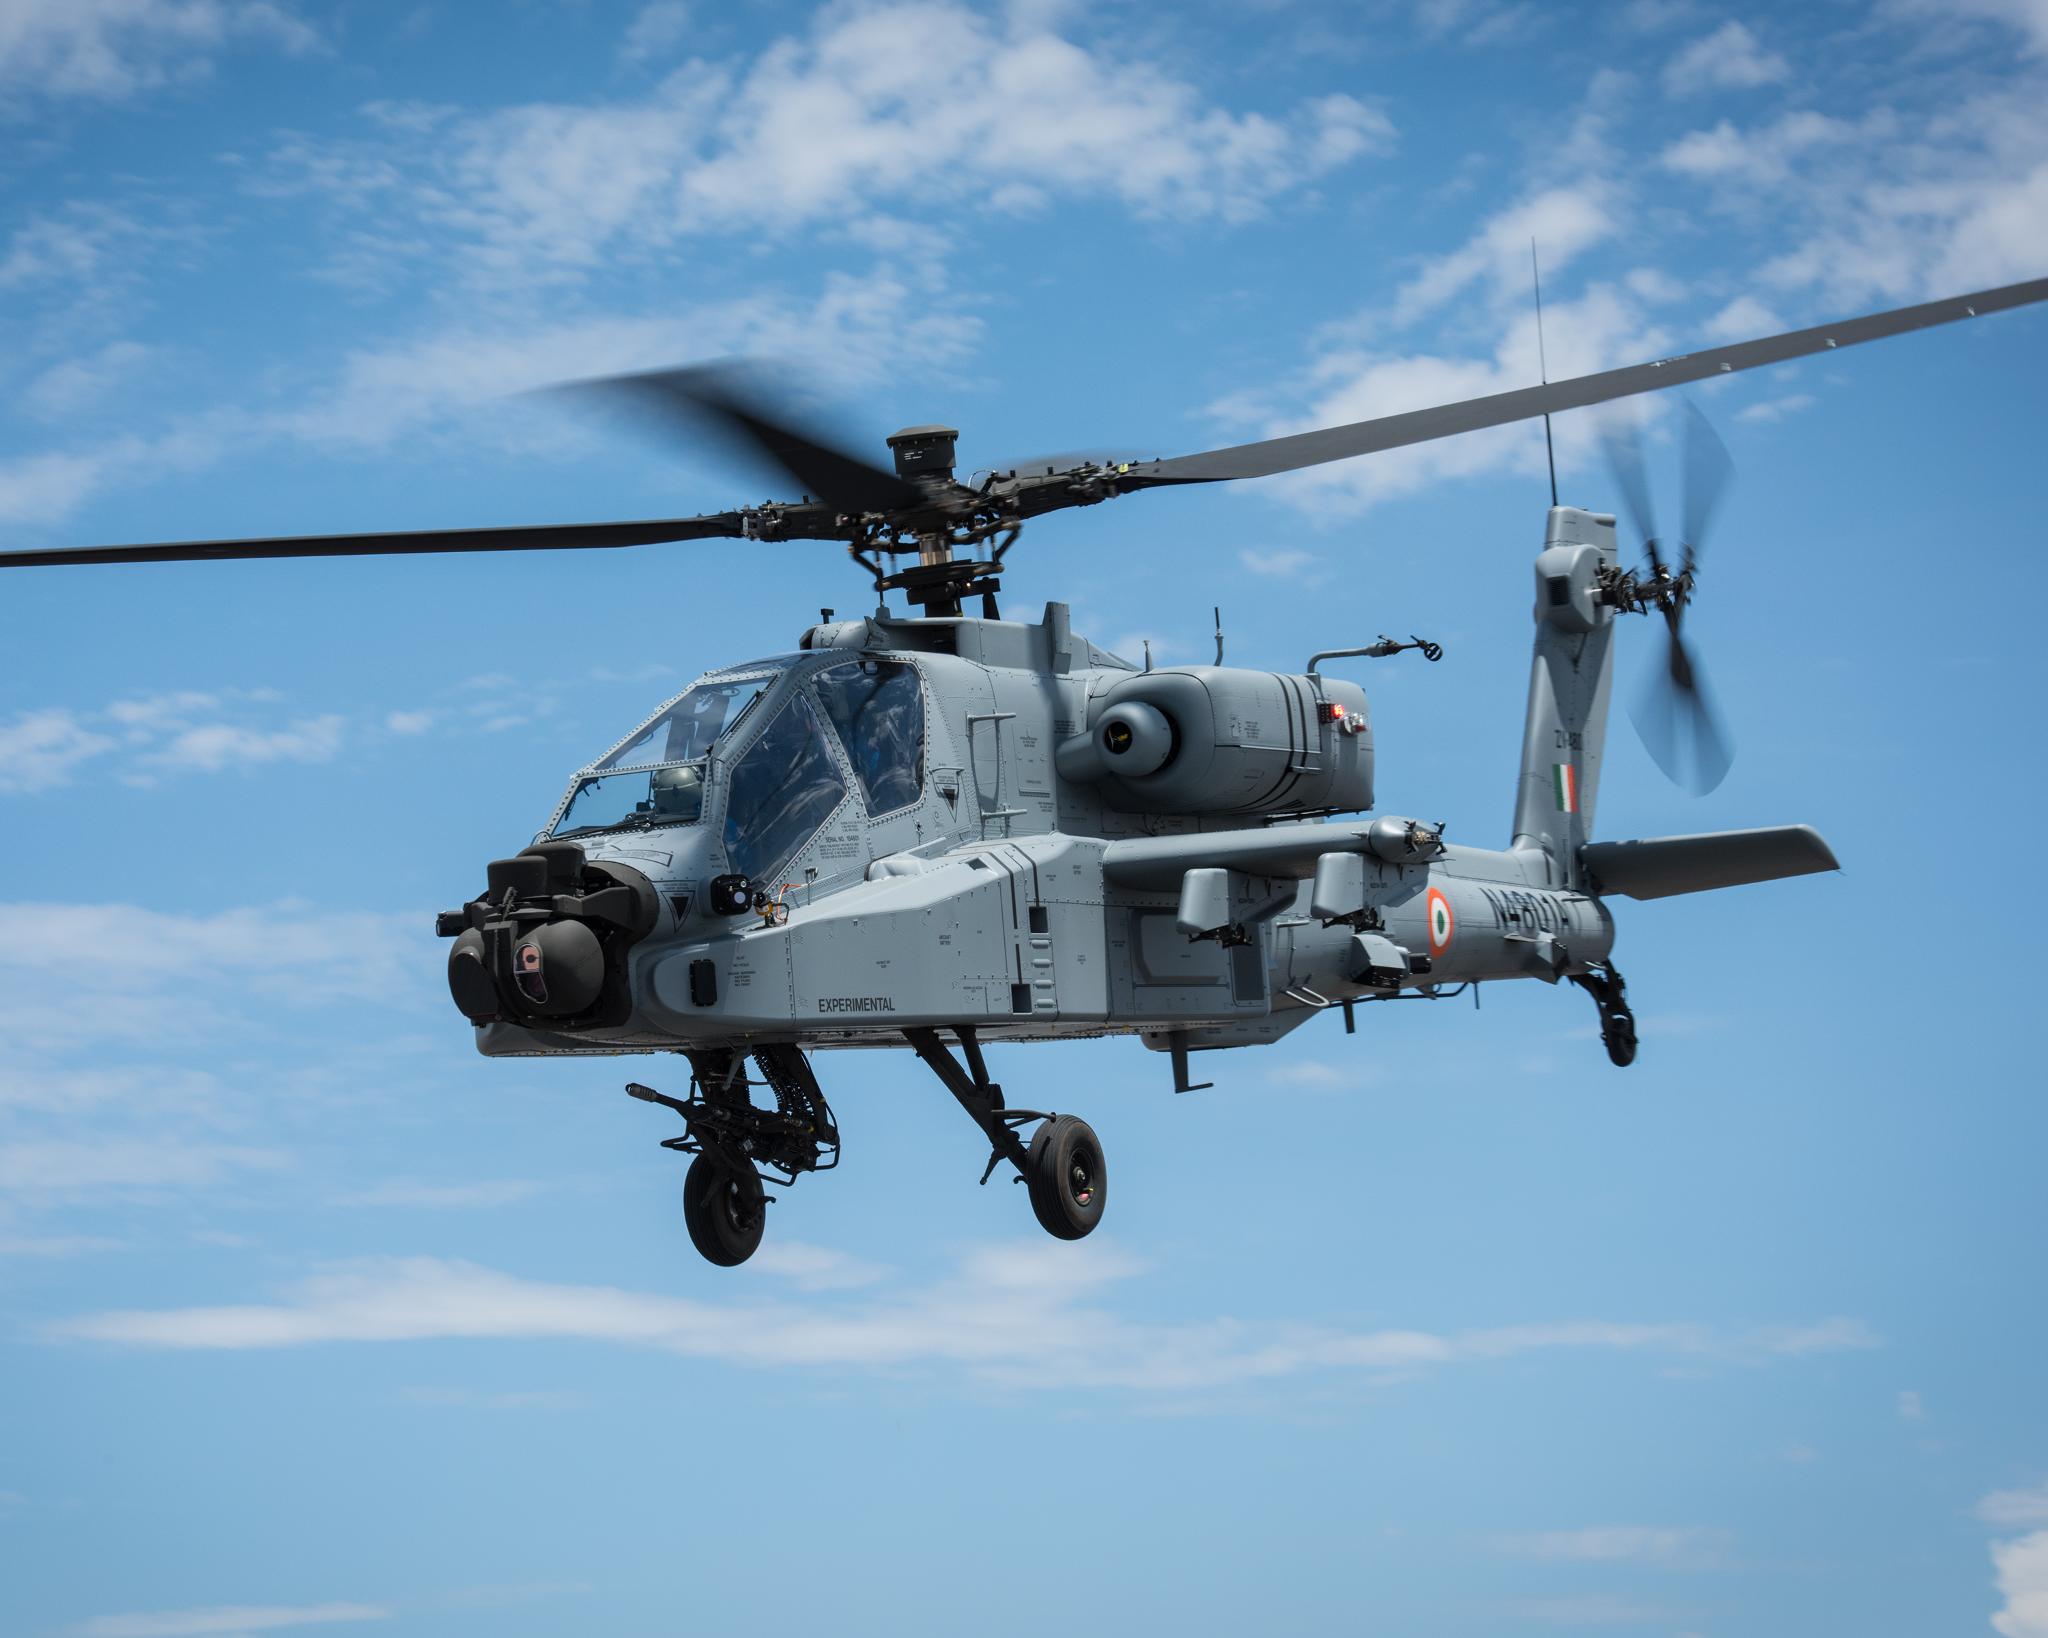 Boeing India on Twitter: "India's incoming AH-64E Apache shows off its attack moves on its first flight! #Boeing-made AH-64 Apache, world's most advanced combat chopper, is on schedule for delivery to @IAF_MCC